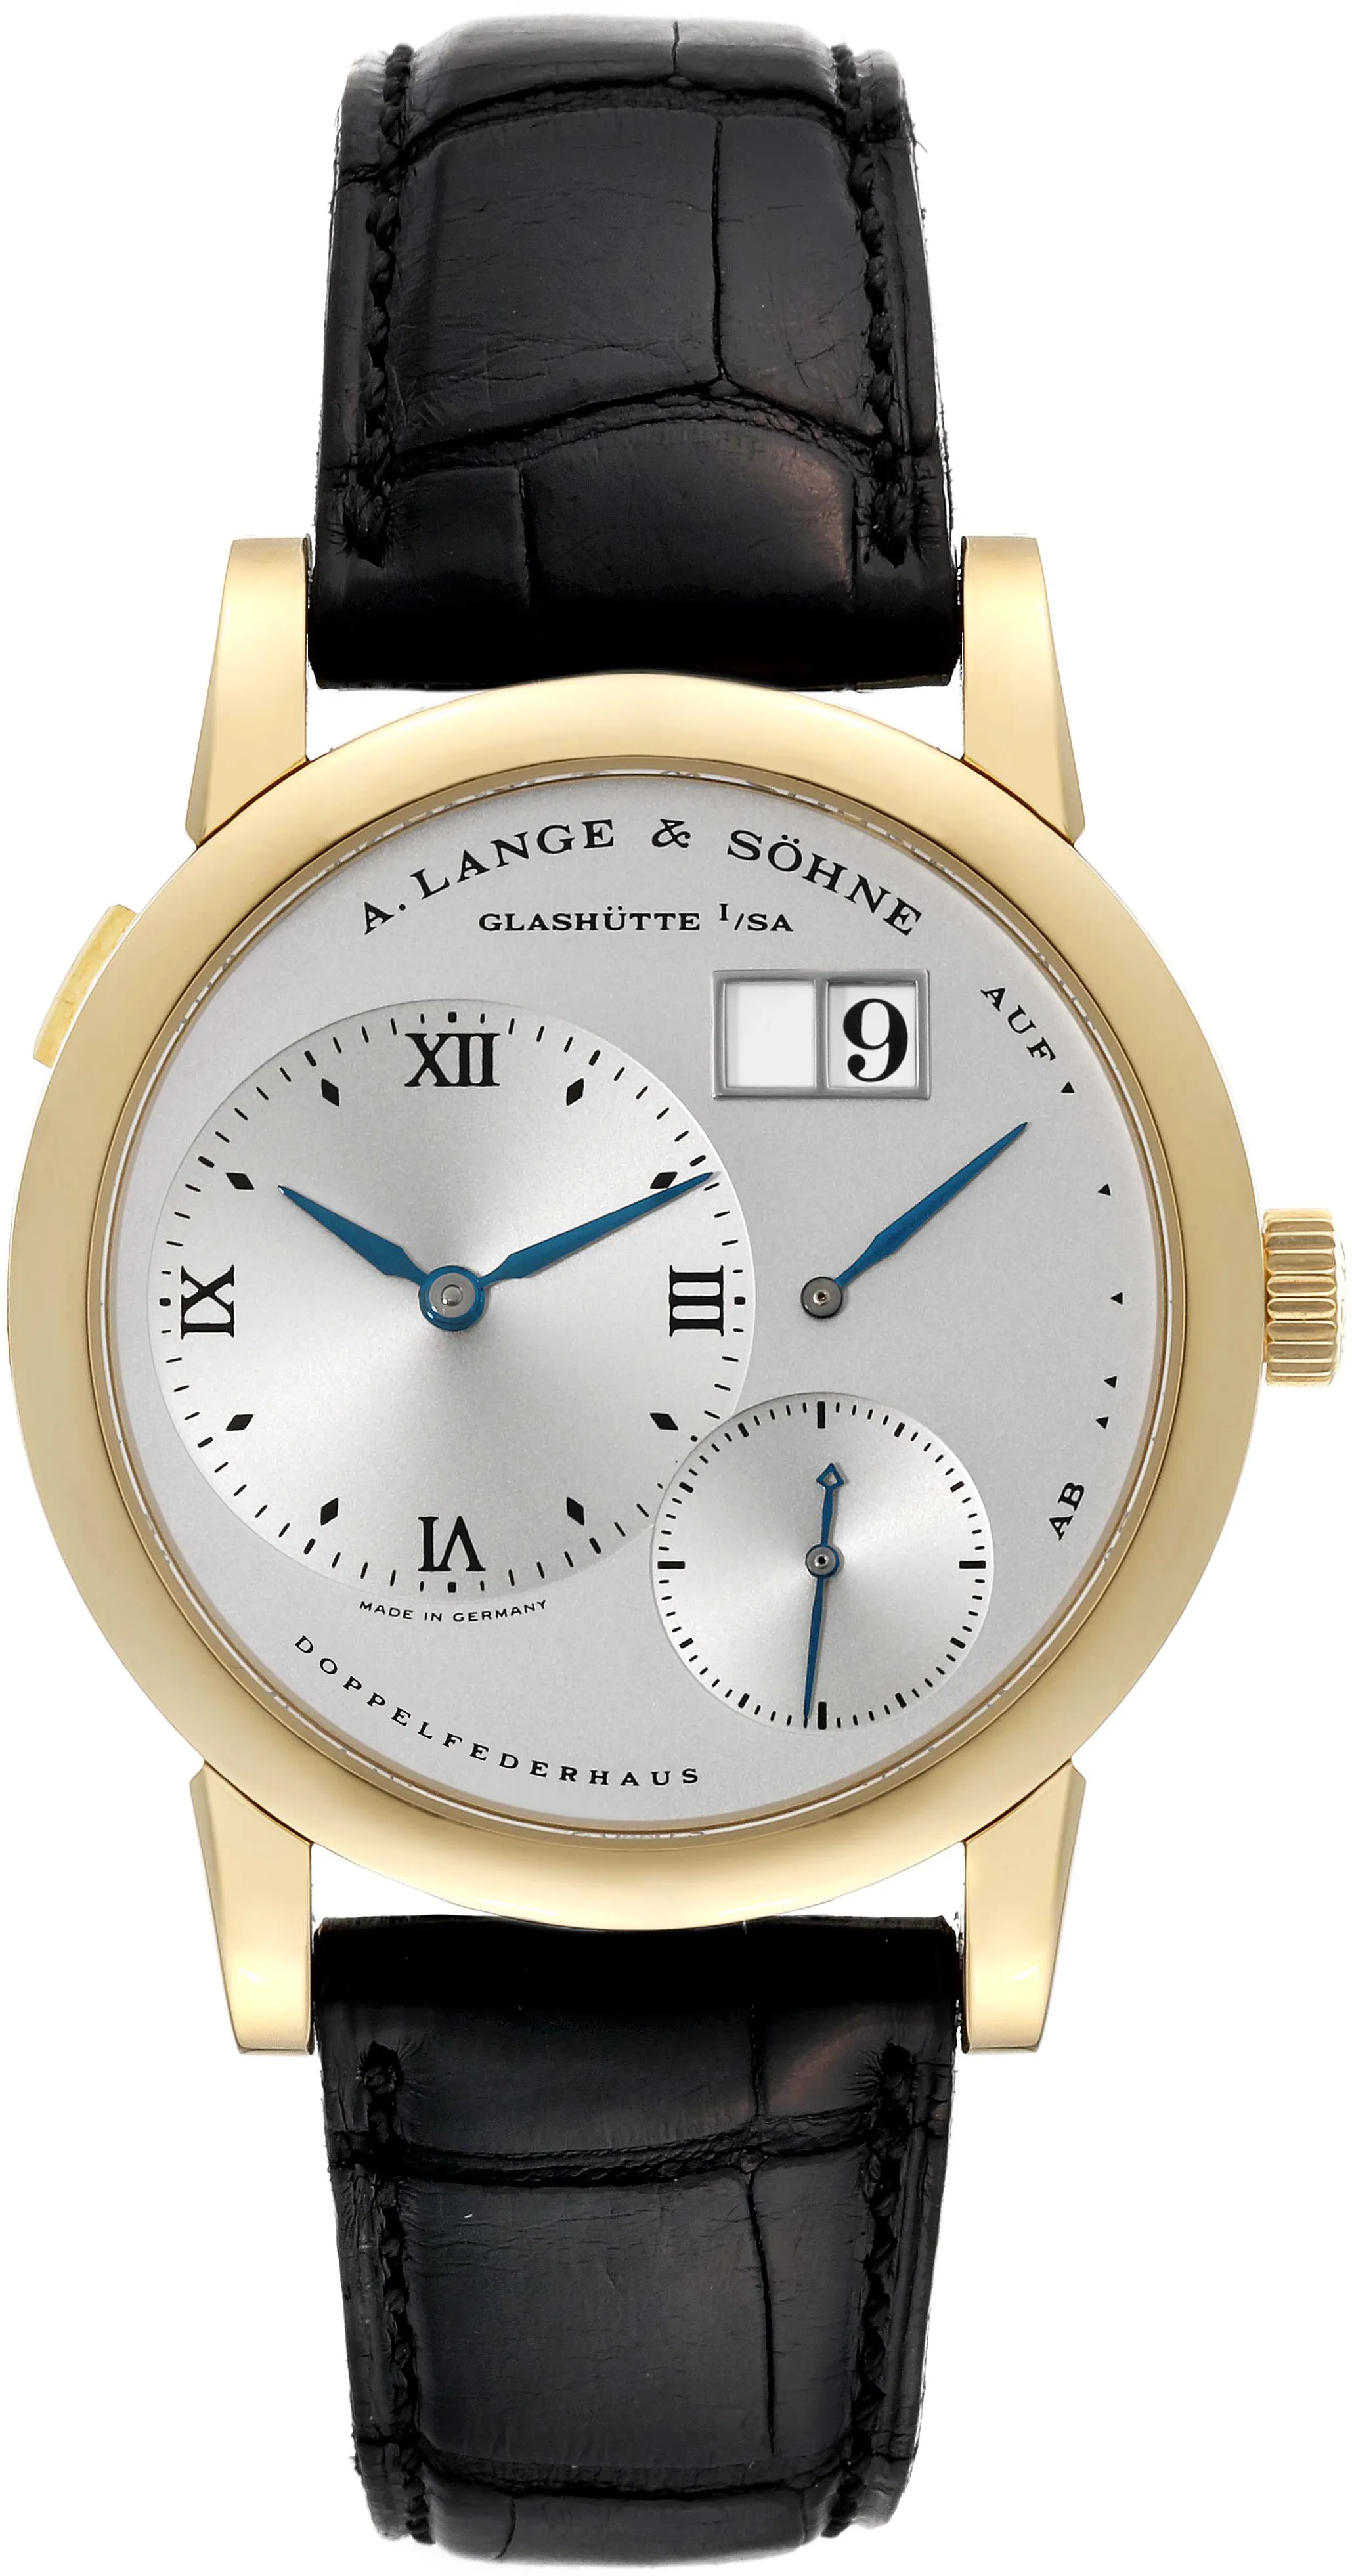 A. Lange & Söhne Lange 1 101.022 38.5mm Yellow gold Silver